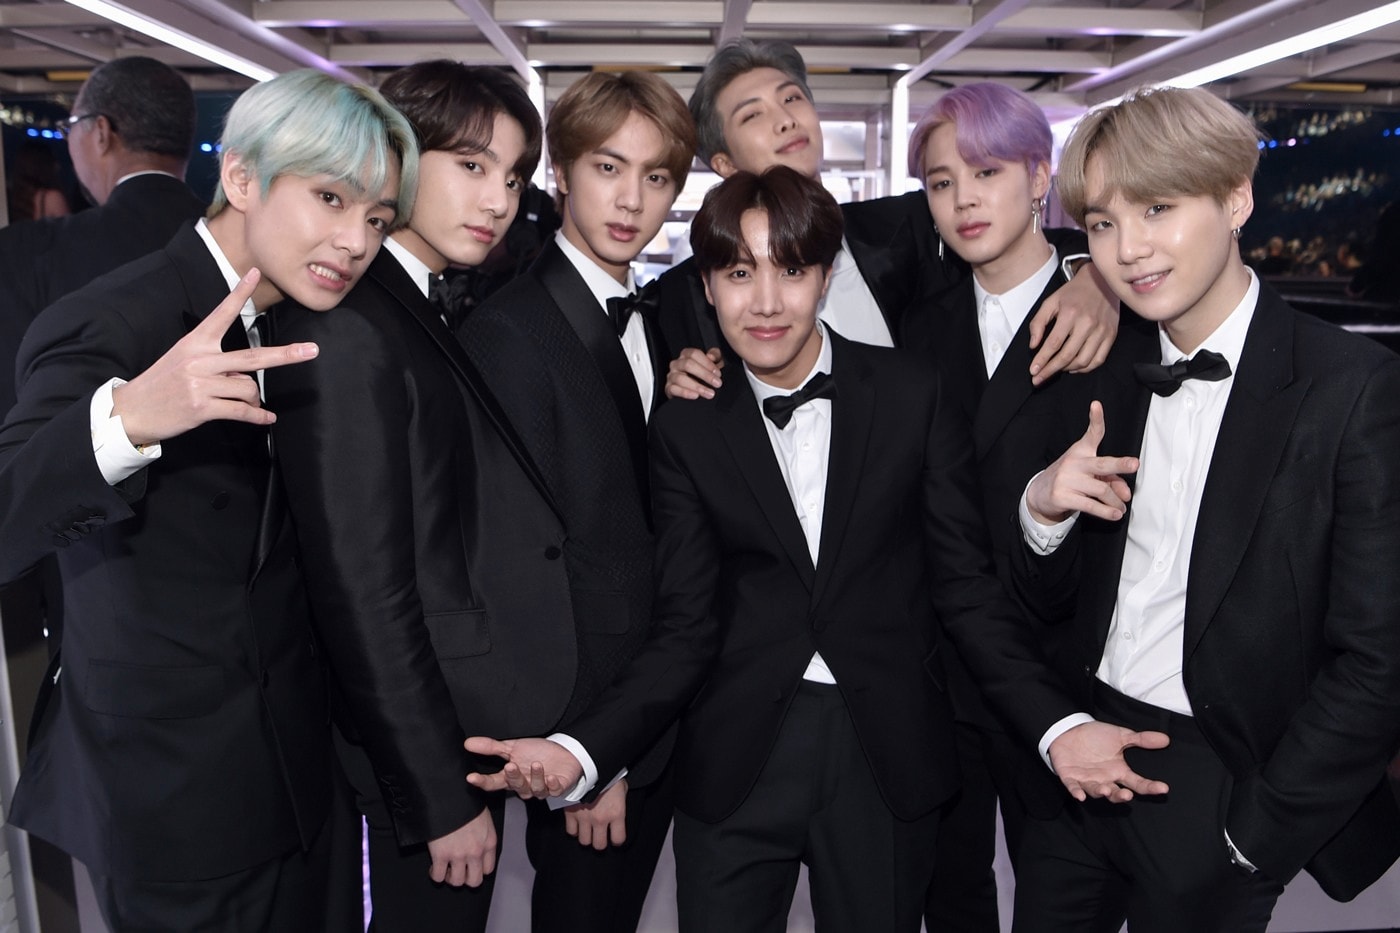 BTS Confirmed as Musical Guest on 'SNL' Emma Stone April 13 Show Performance Album Release Date